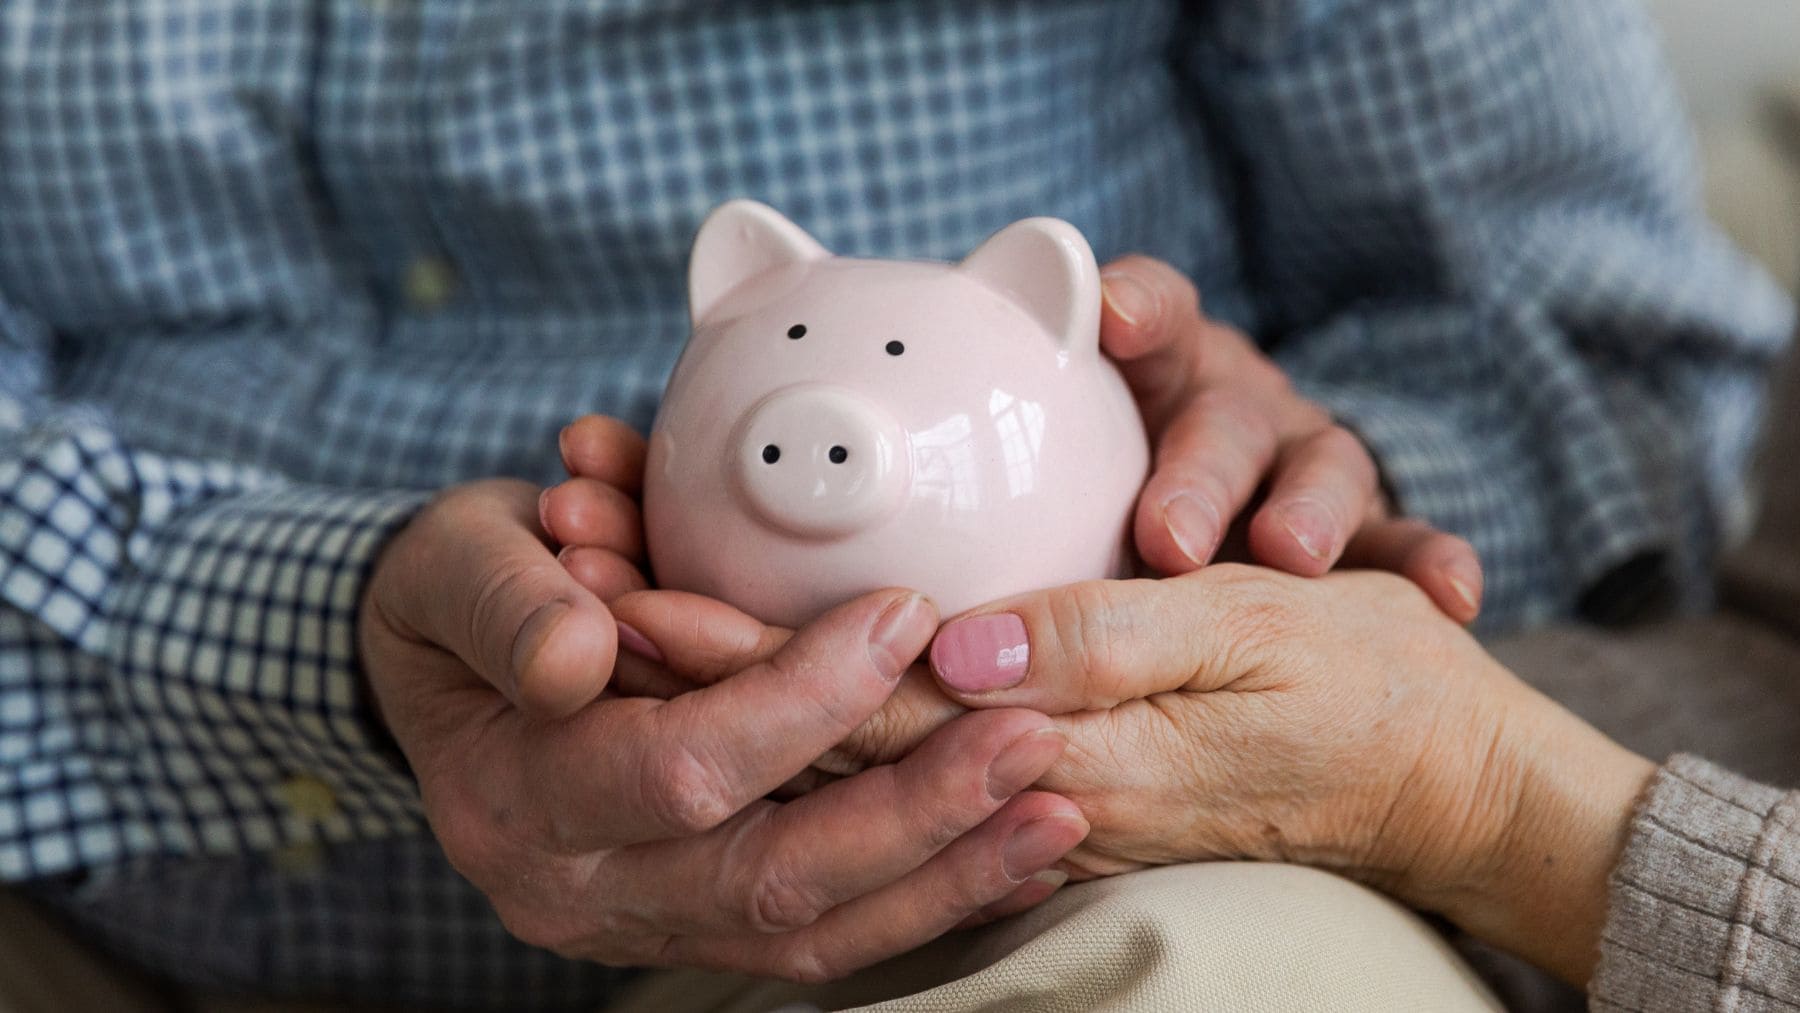 Saving money for retirement is really important